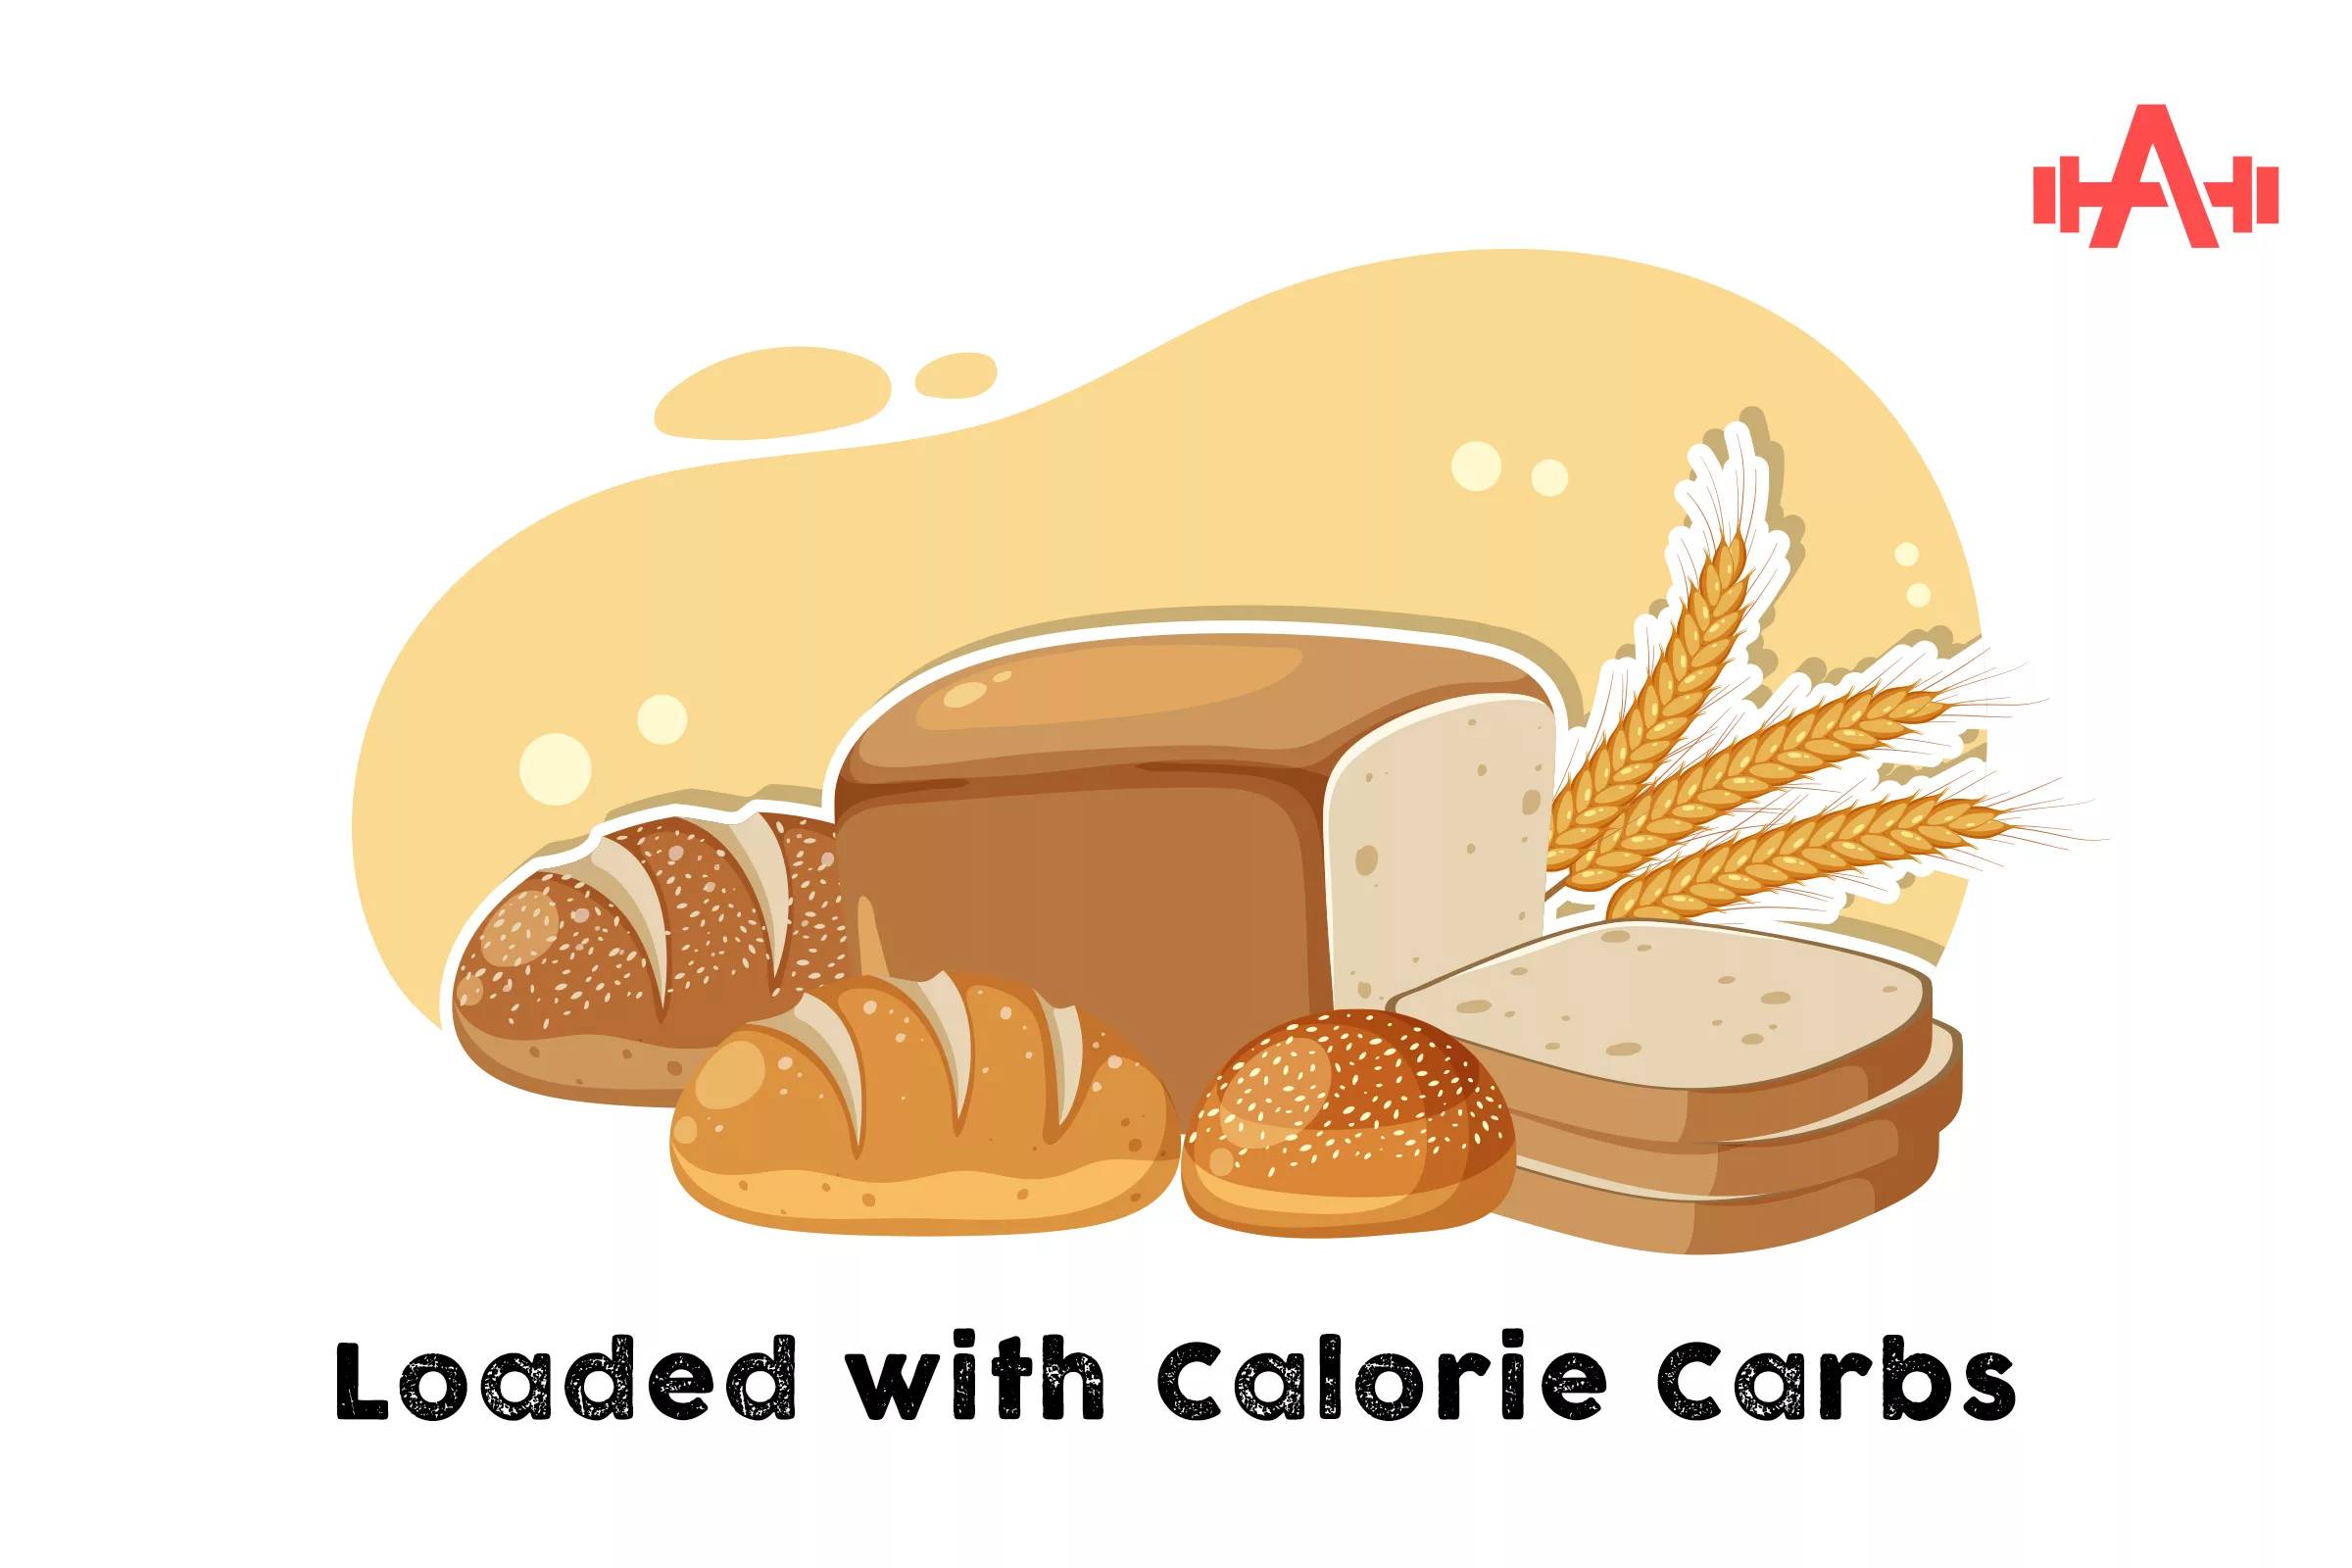 Loaded with Clean Calorie Carbs